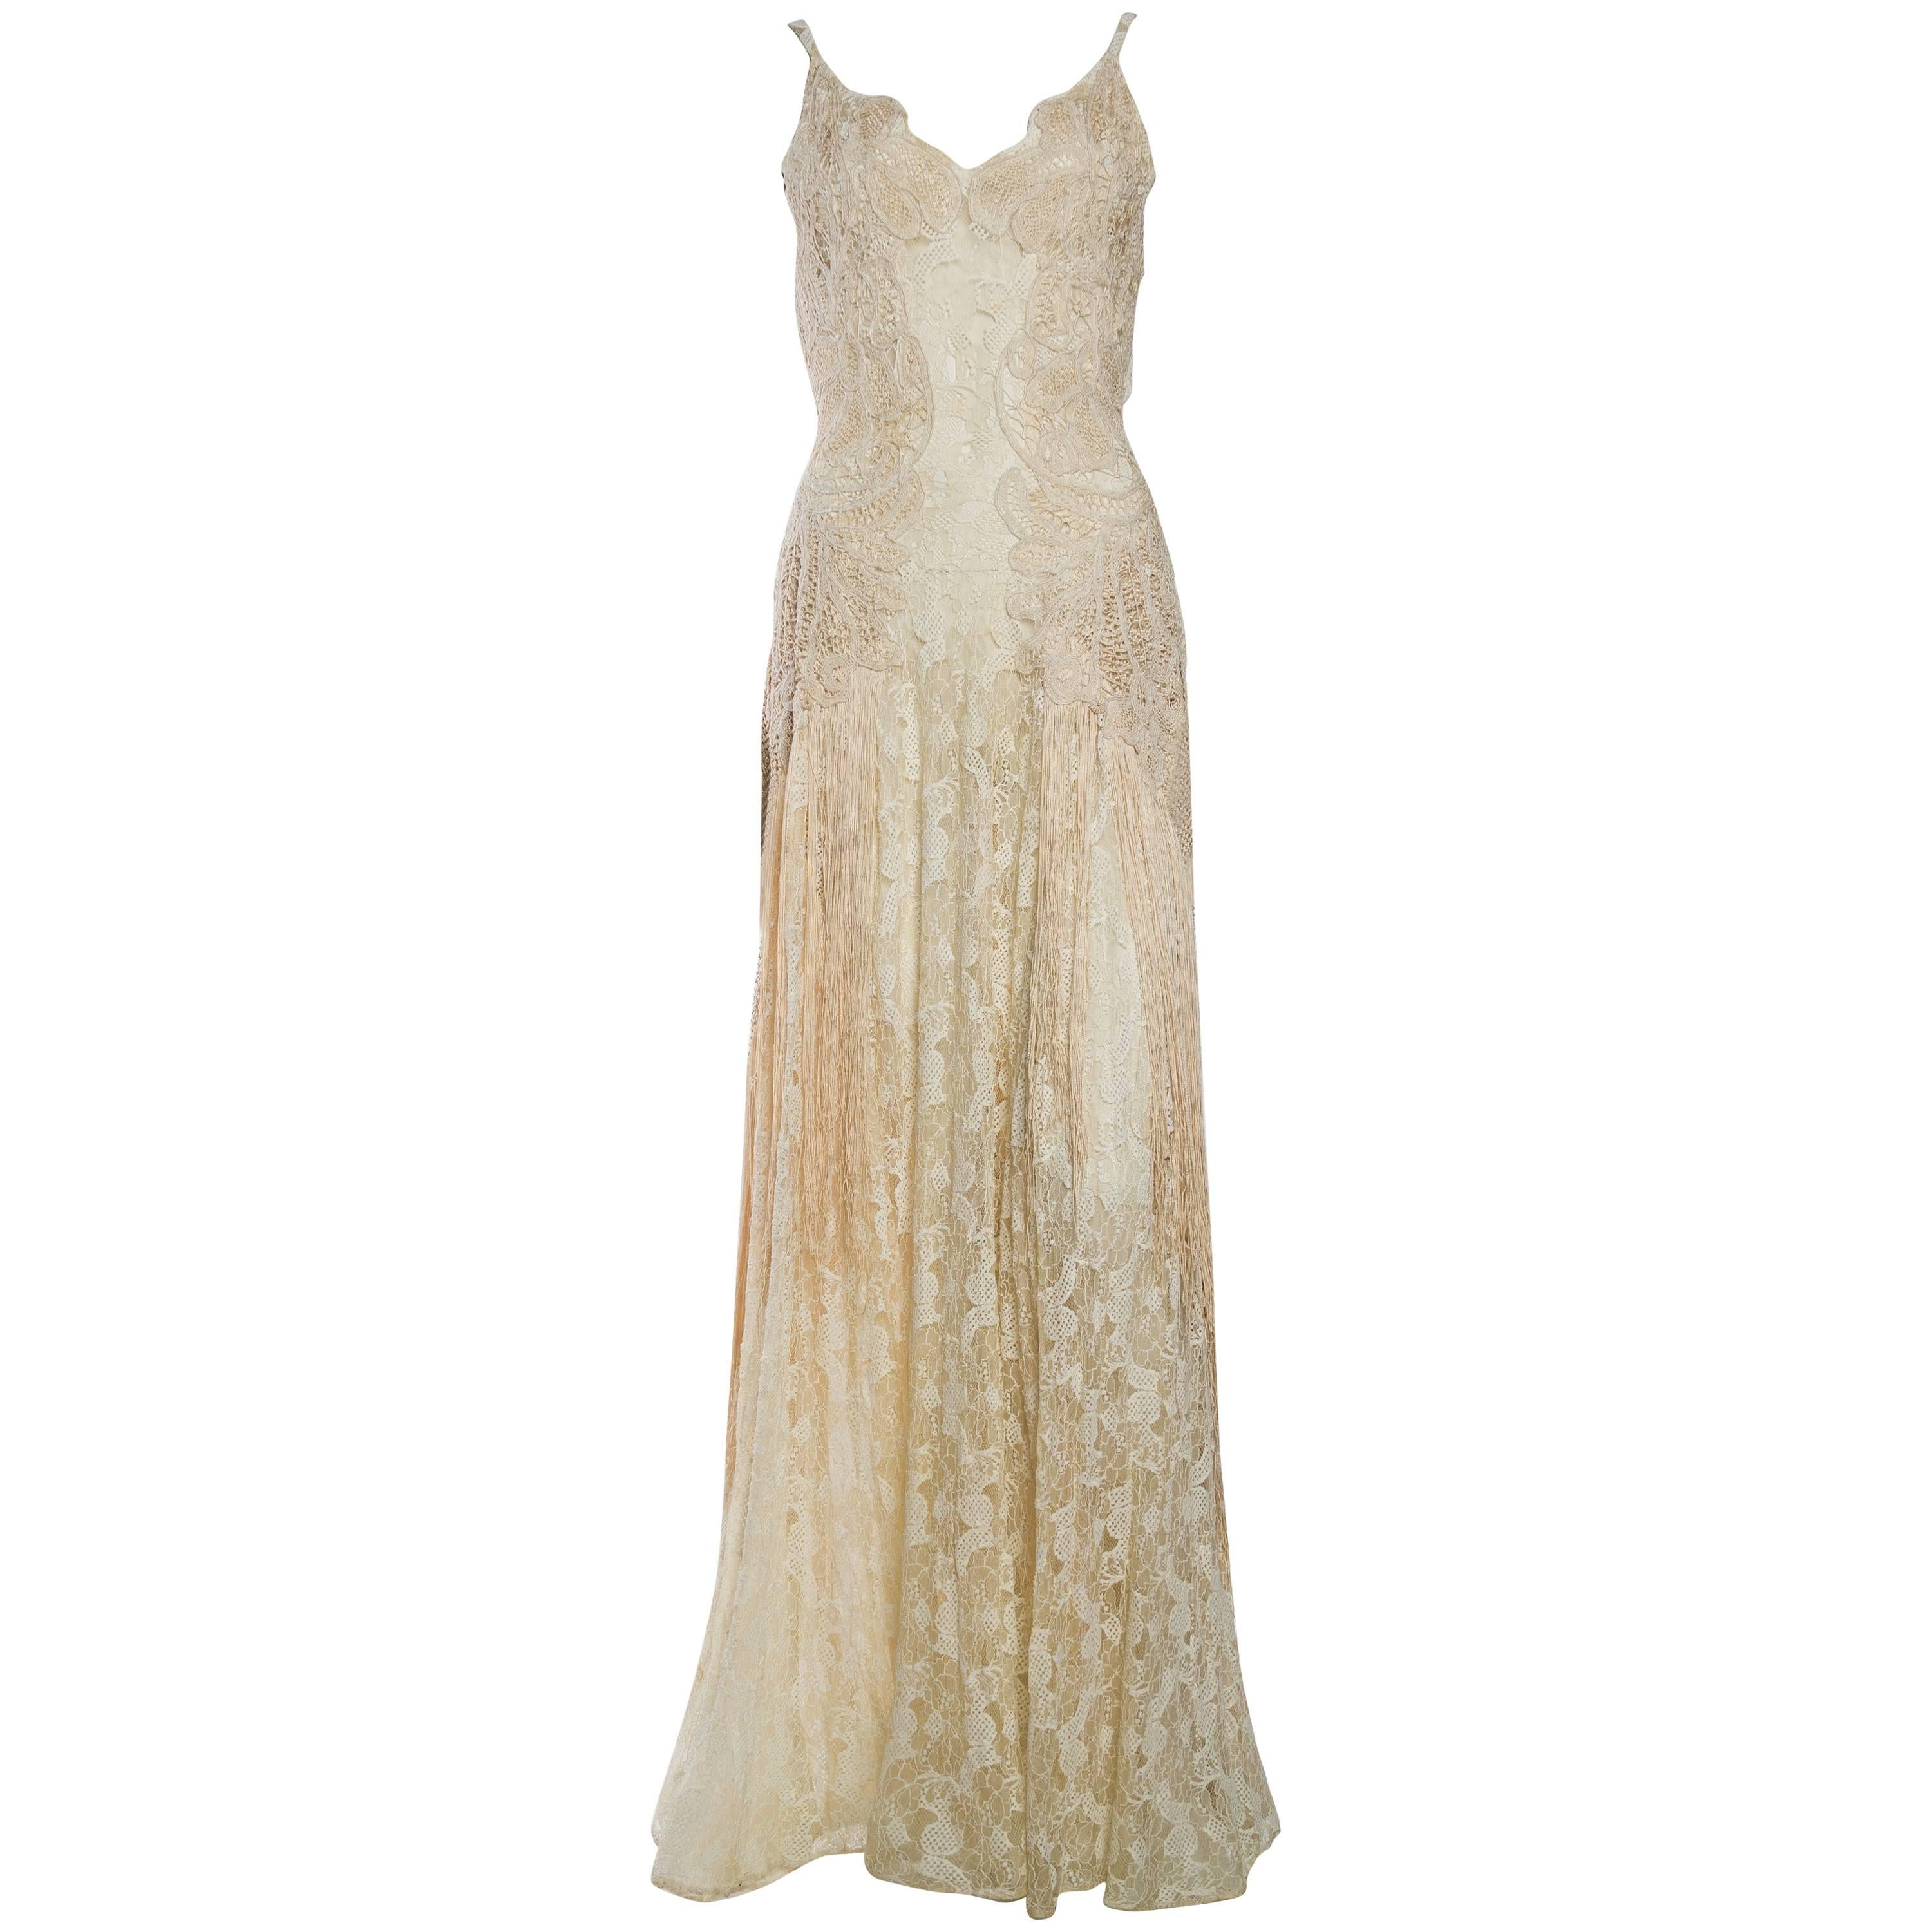 1930s Sheer Silk Lace Gown with Victorian Lace Fringe